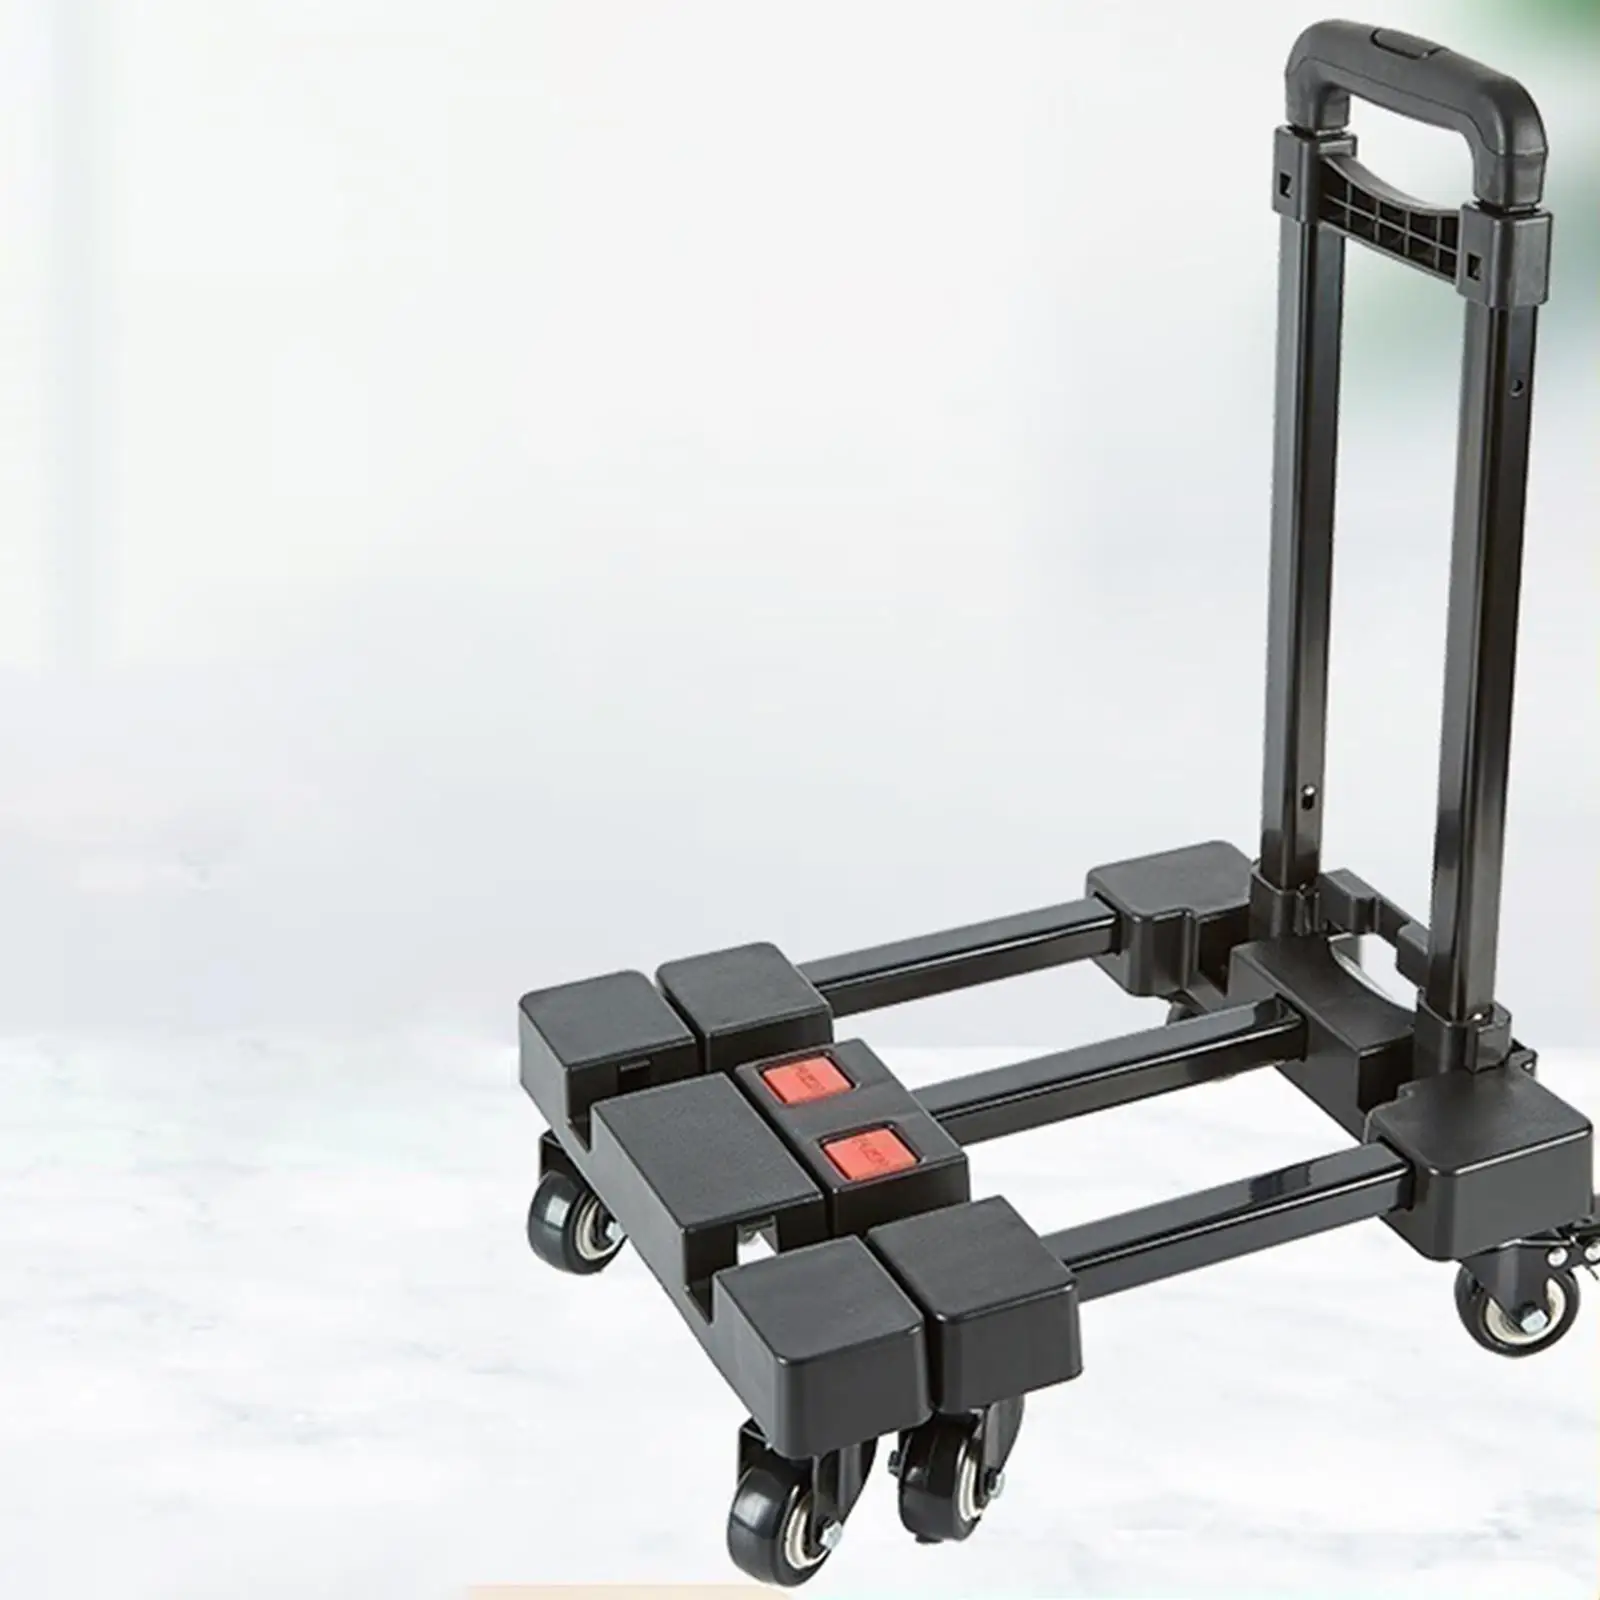 Folding Hand Truck Portable Sturdy Moving Luggages Cart for Moving Delivery Transportation 100kg (220lb) Load Capacity